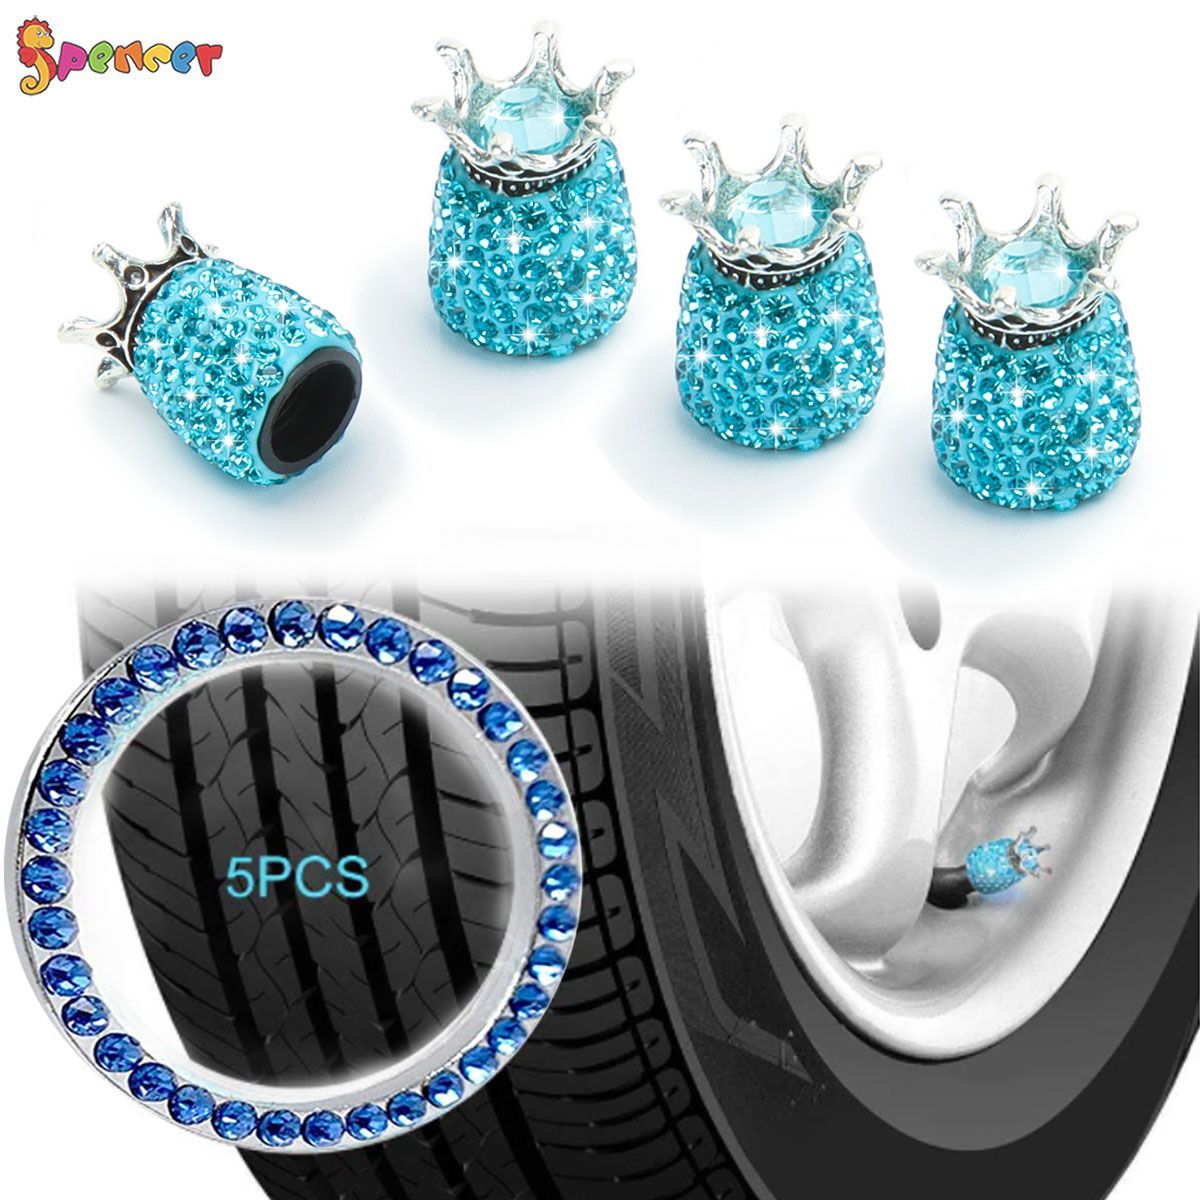 Spencer Pack Rhinestone Crown Valve Stem Caps Handmade Crystal Universal  Tire Valve Dust Caps Bling Car Accessories with 1PC Ring Emblem Sticker for  Auto Ornamen 